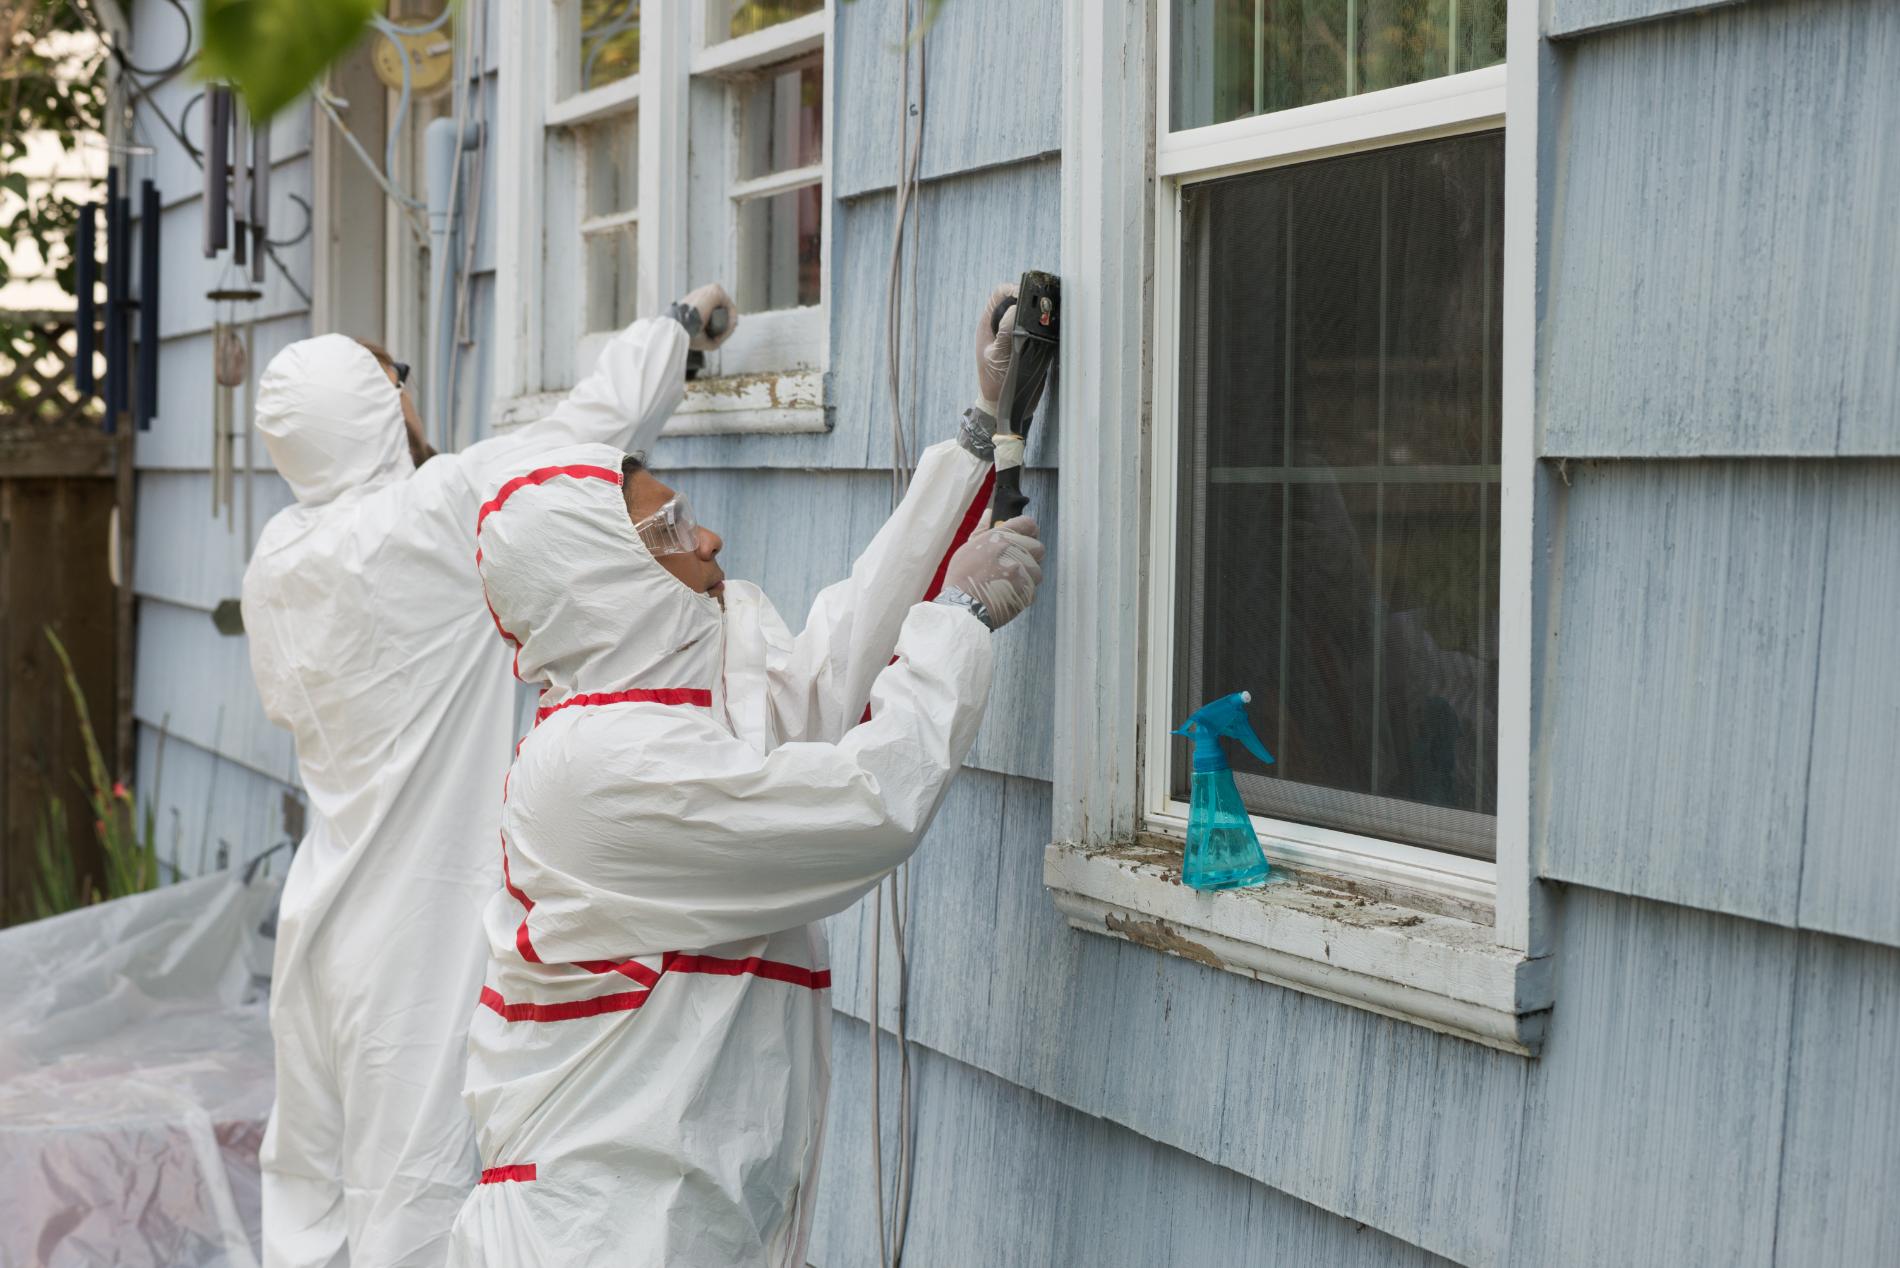 lead paint removal